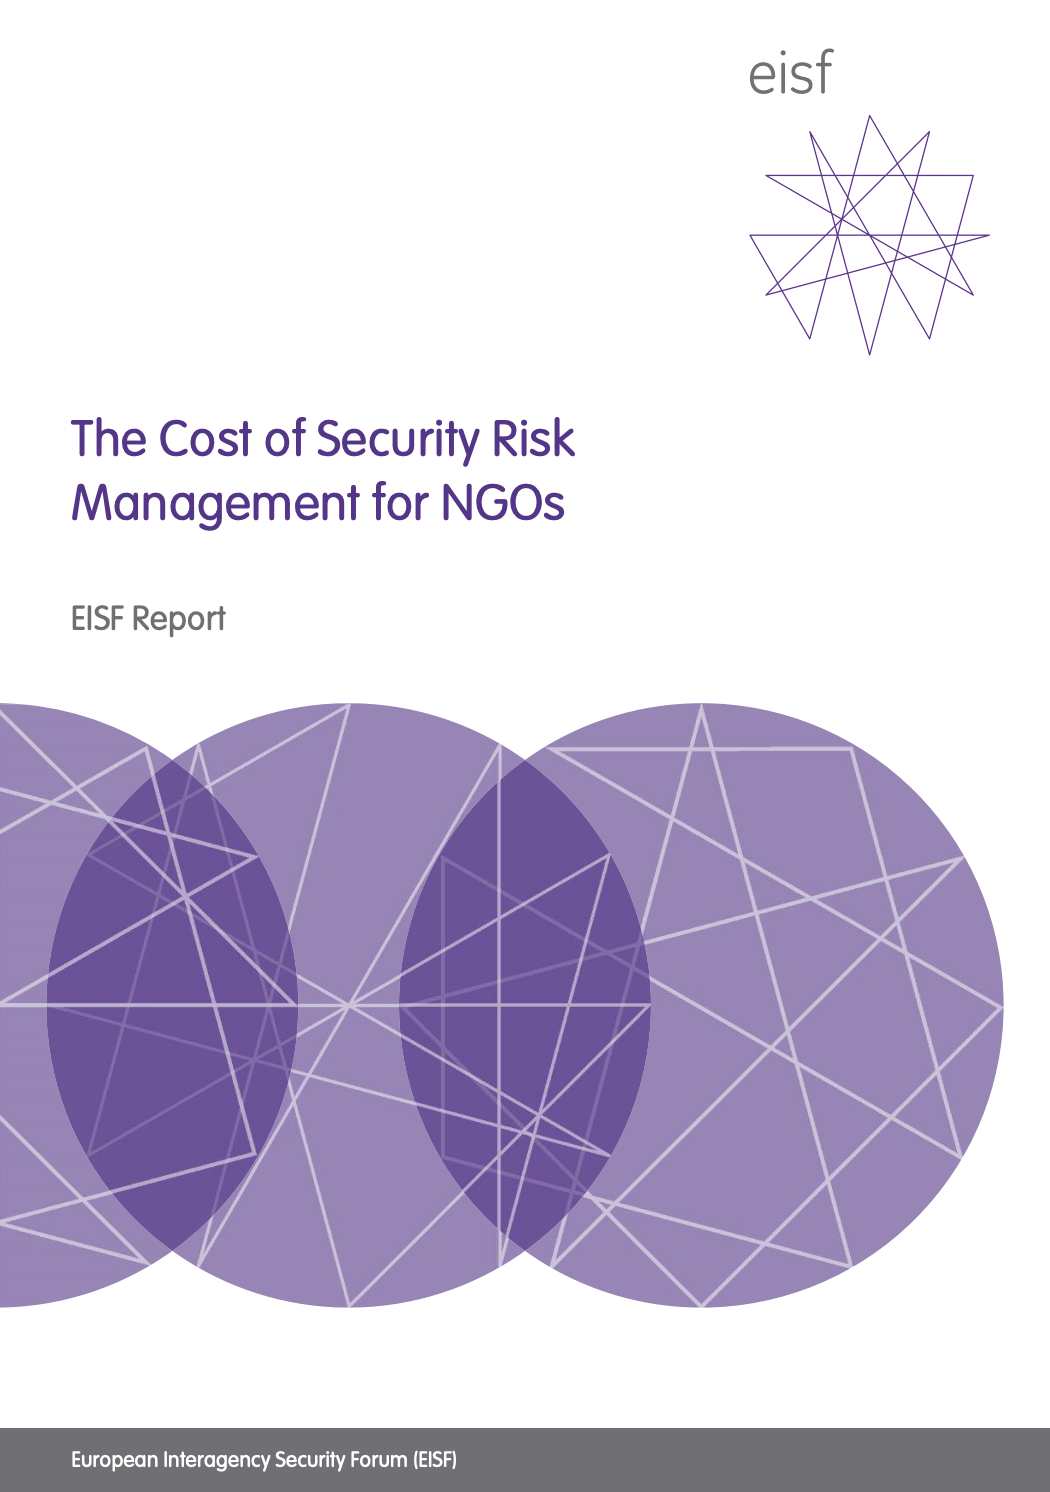 The Cost of Security Risk Management for NGOs